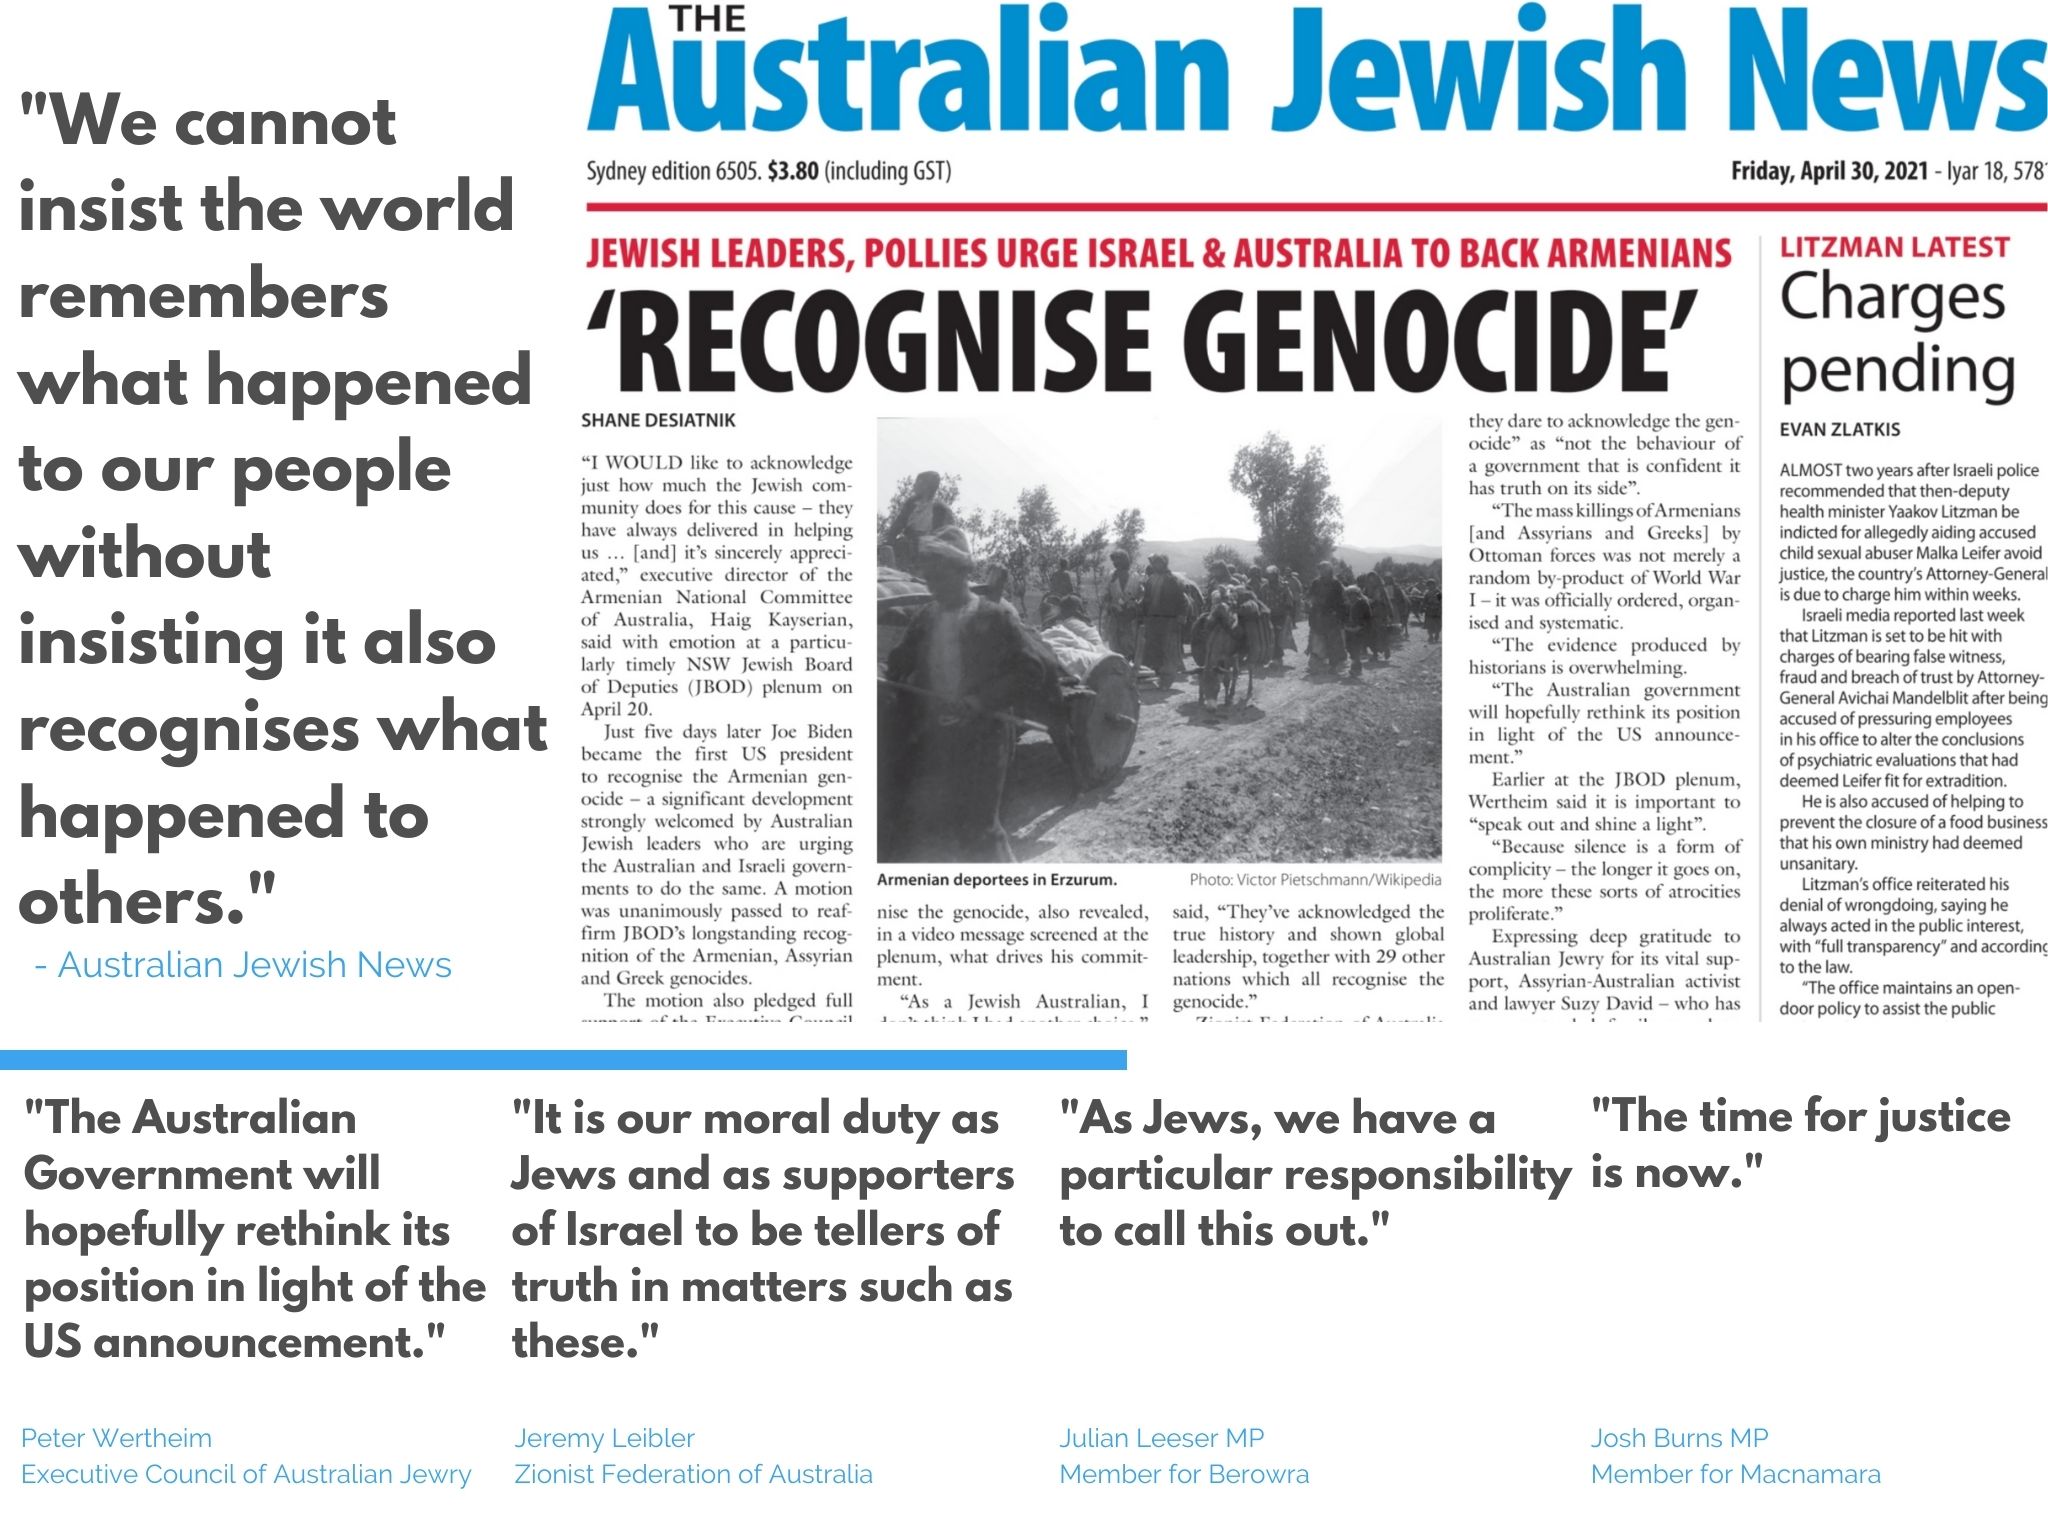 Animal rights activist sparks outrage with Holocaust analogy – The  Australian Jewish News